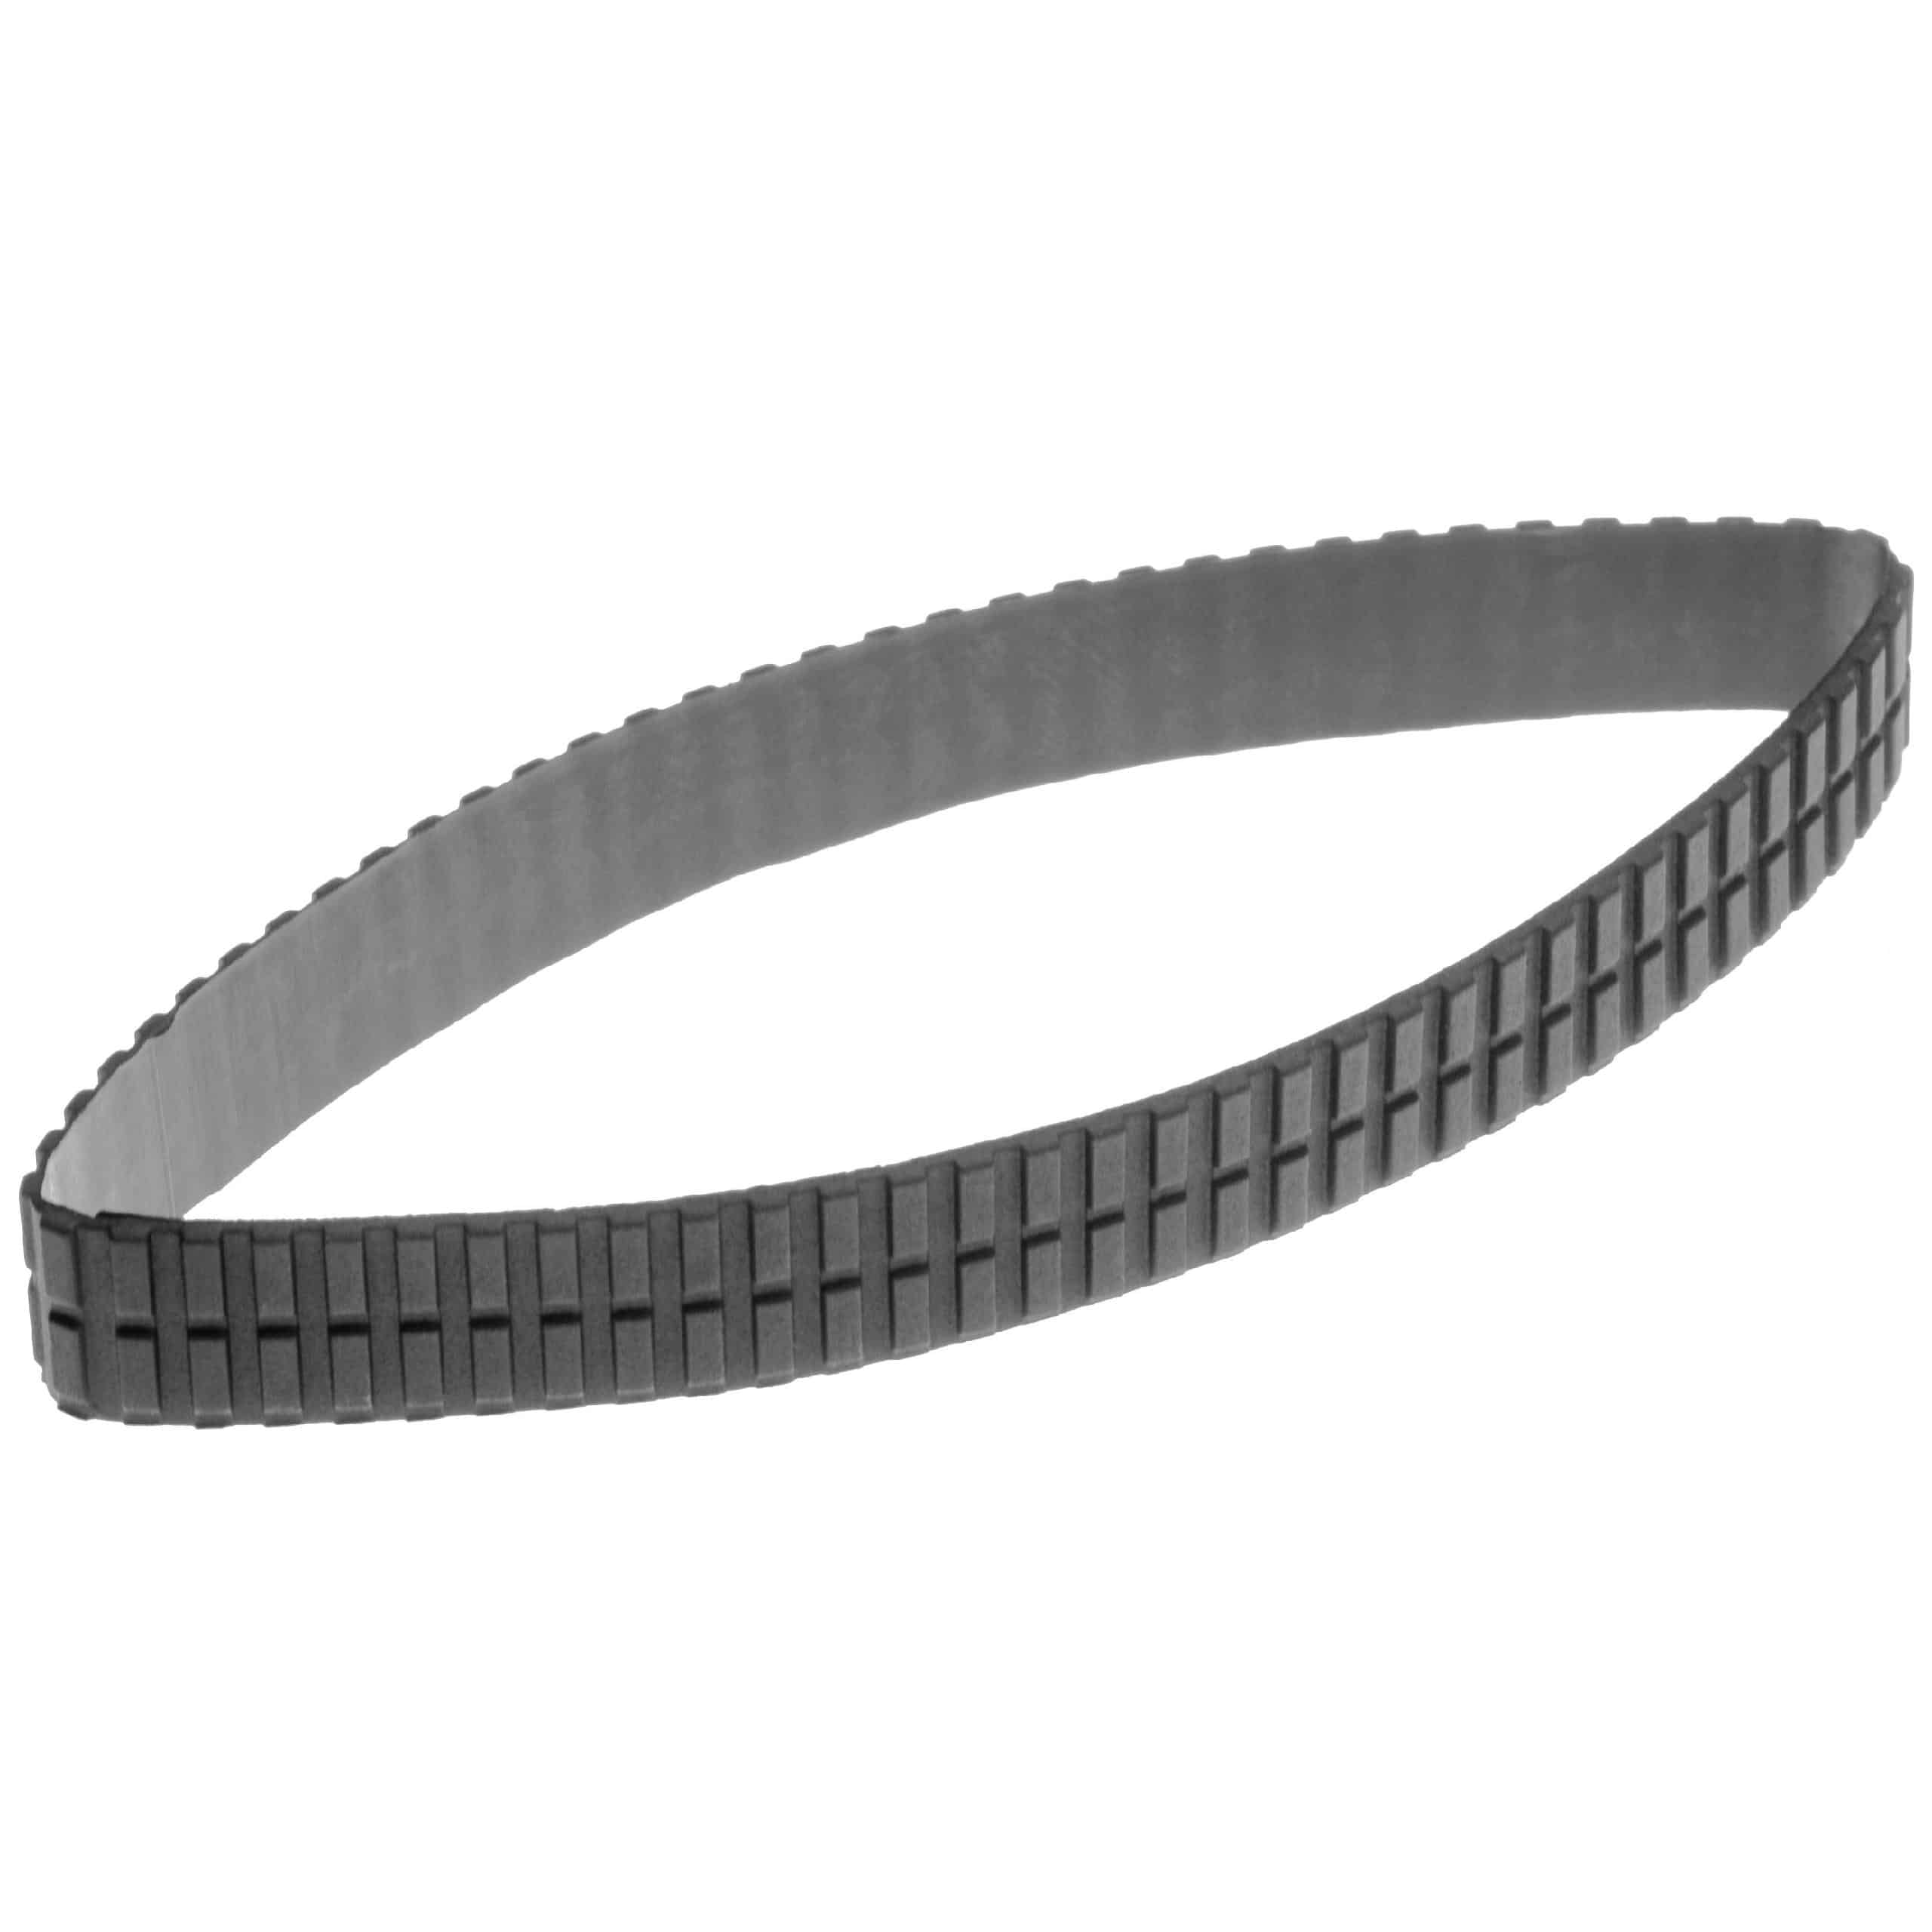 11 mm Rubber Ring suitable for Tamron SP 24-70mm f/2.8 Di VC USD G2 Camera Lens - Focus Grip